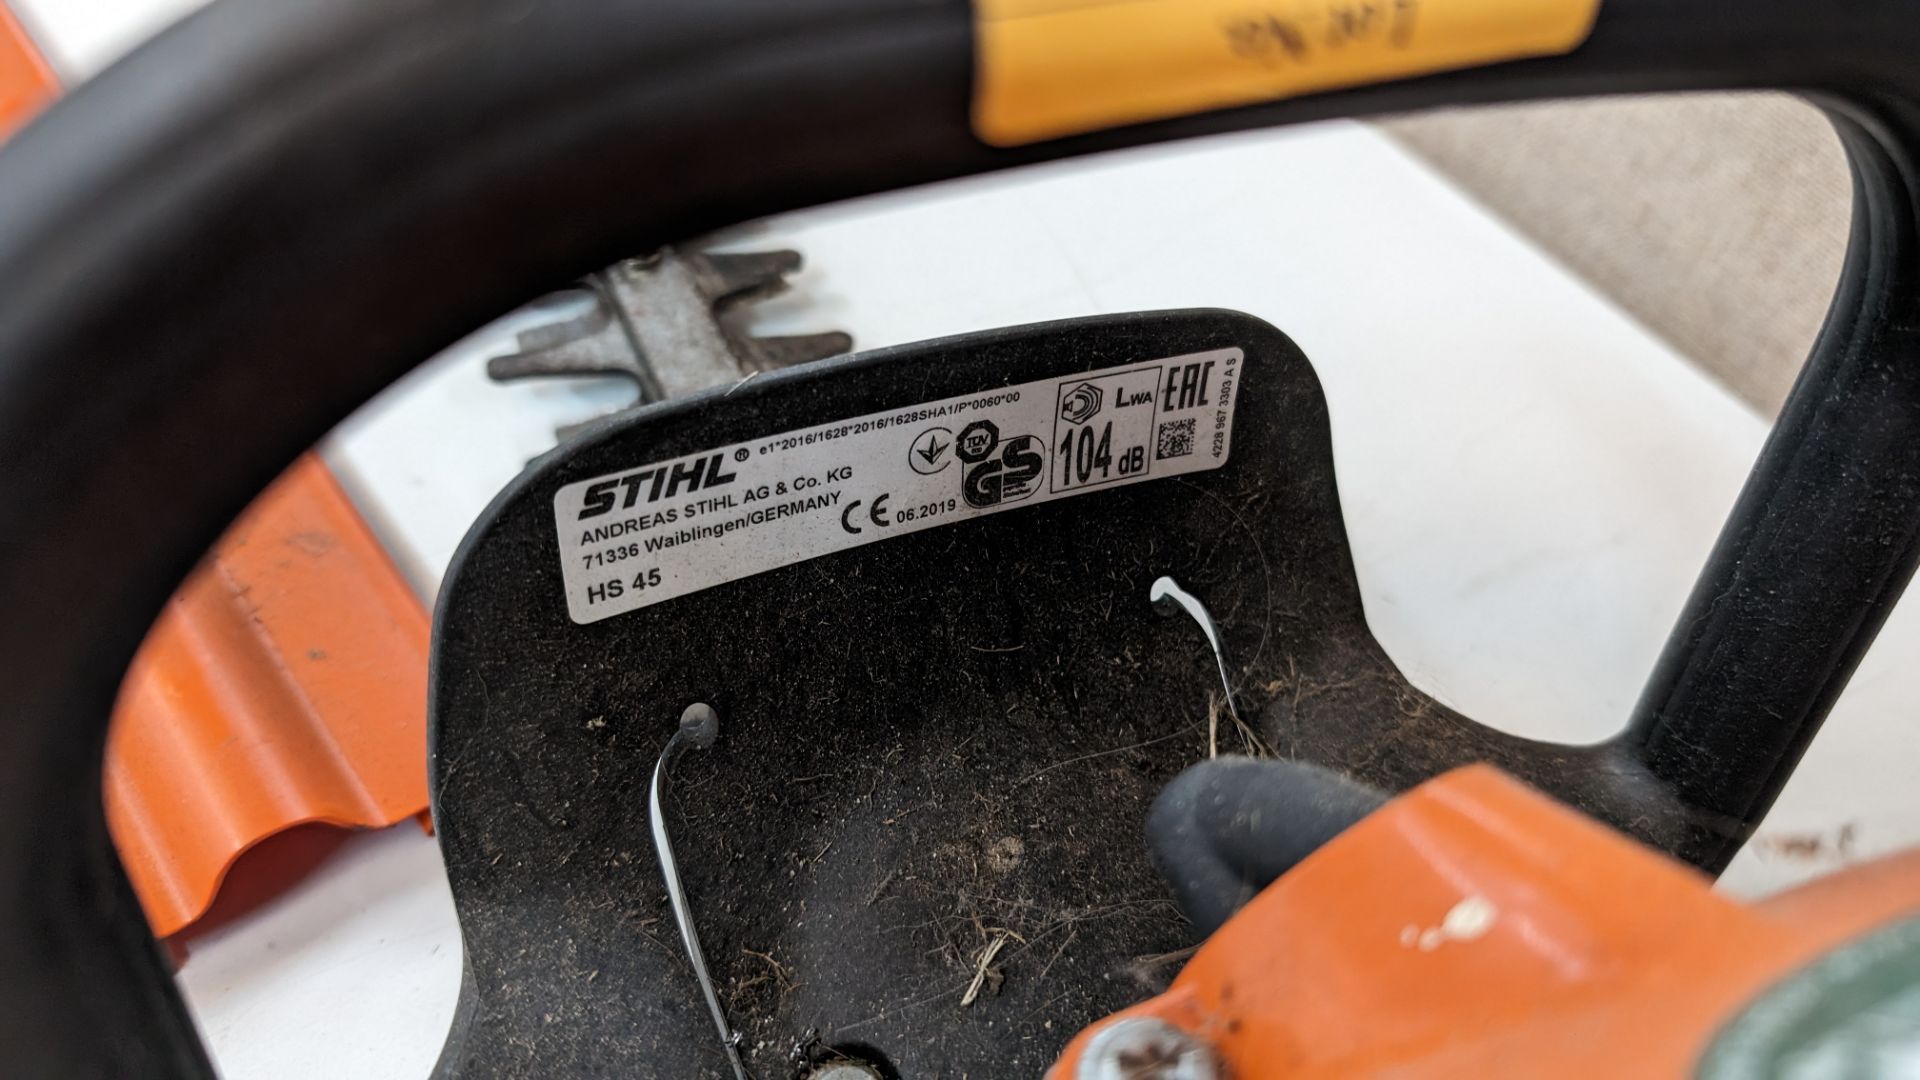 Stihl petrol powered trimmer, model HS45 - Image 6 of 12